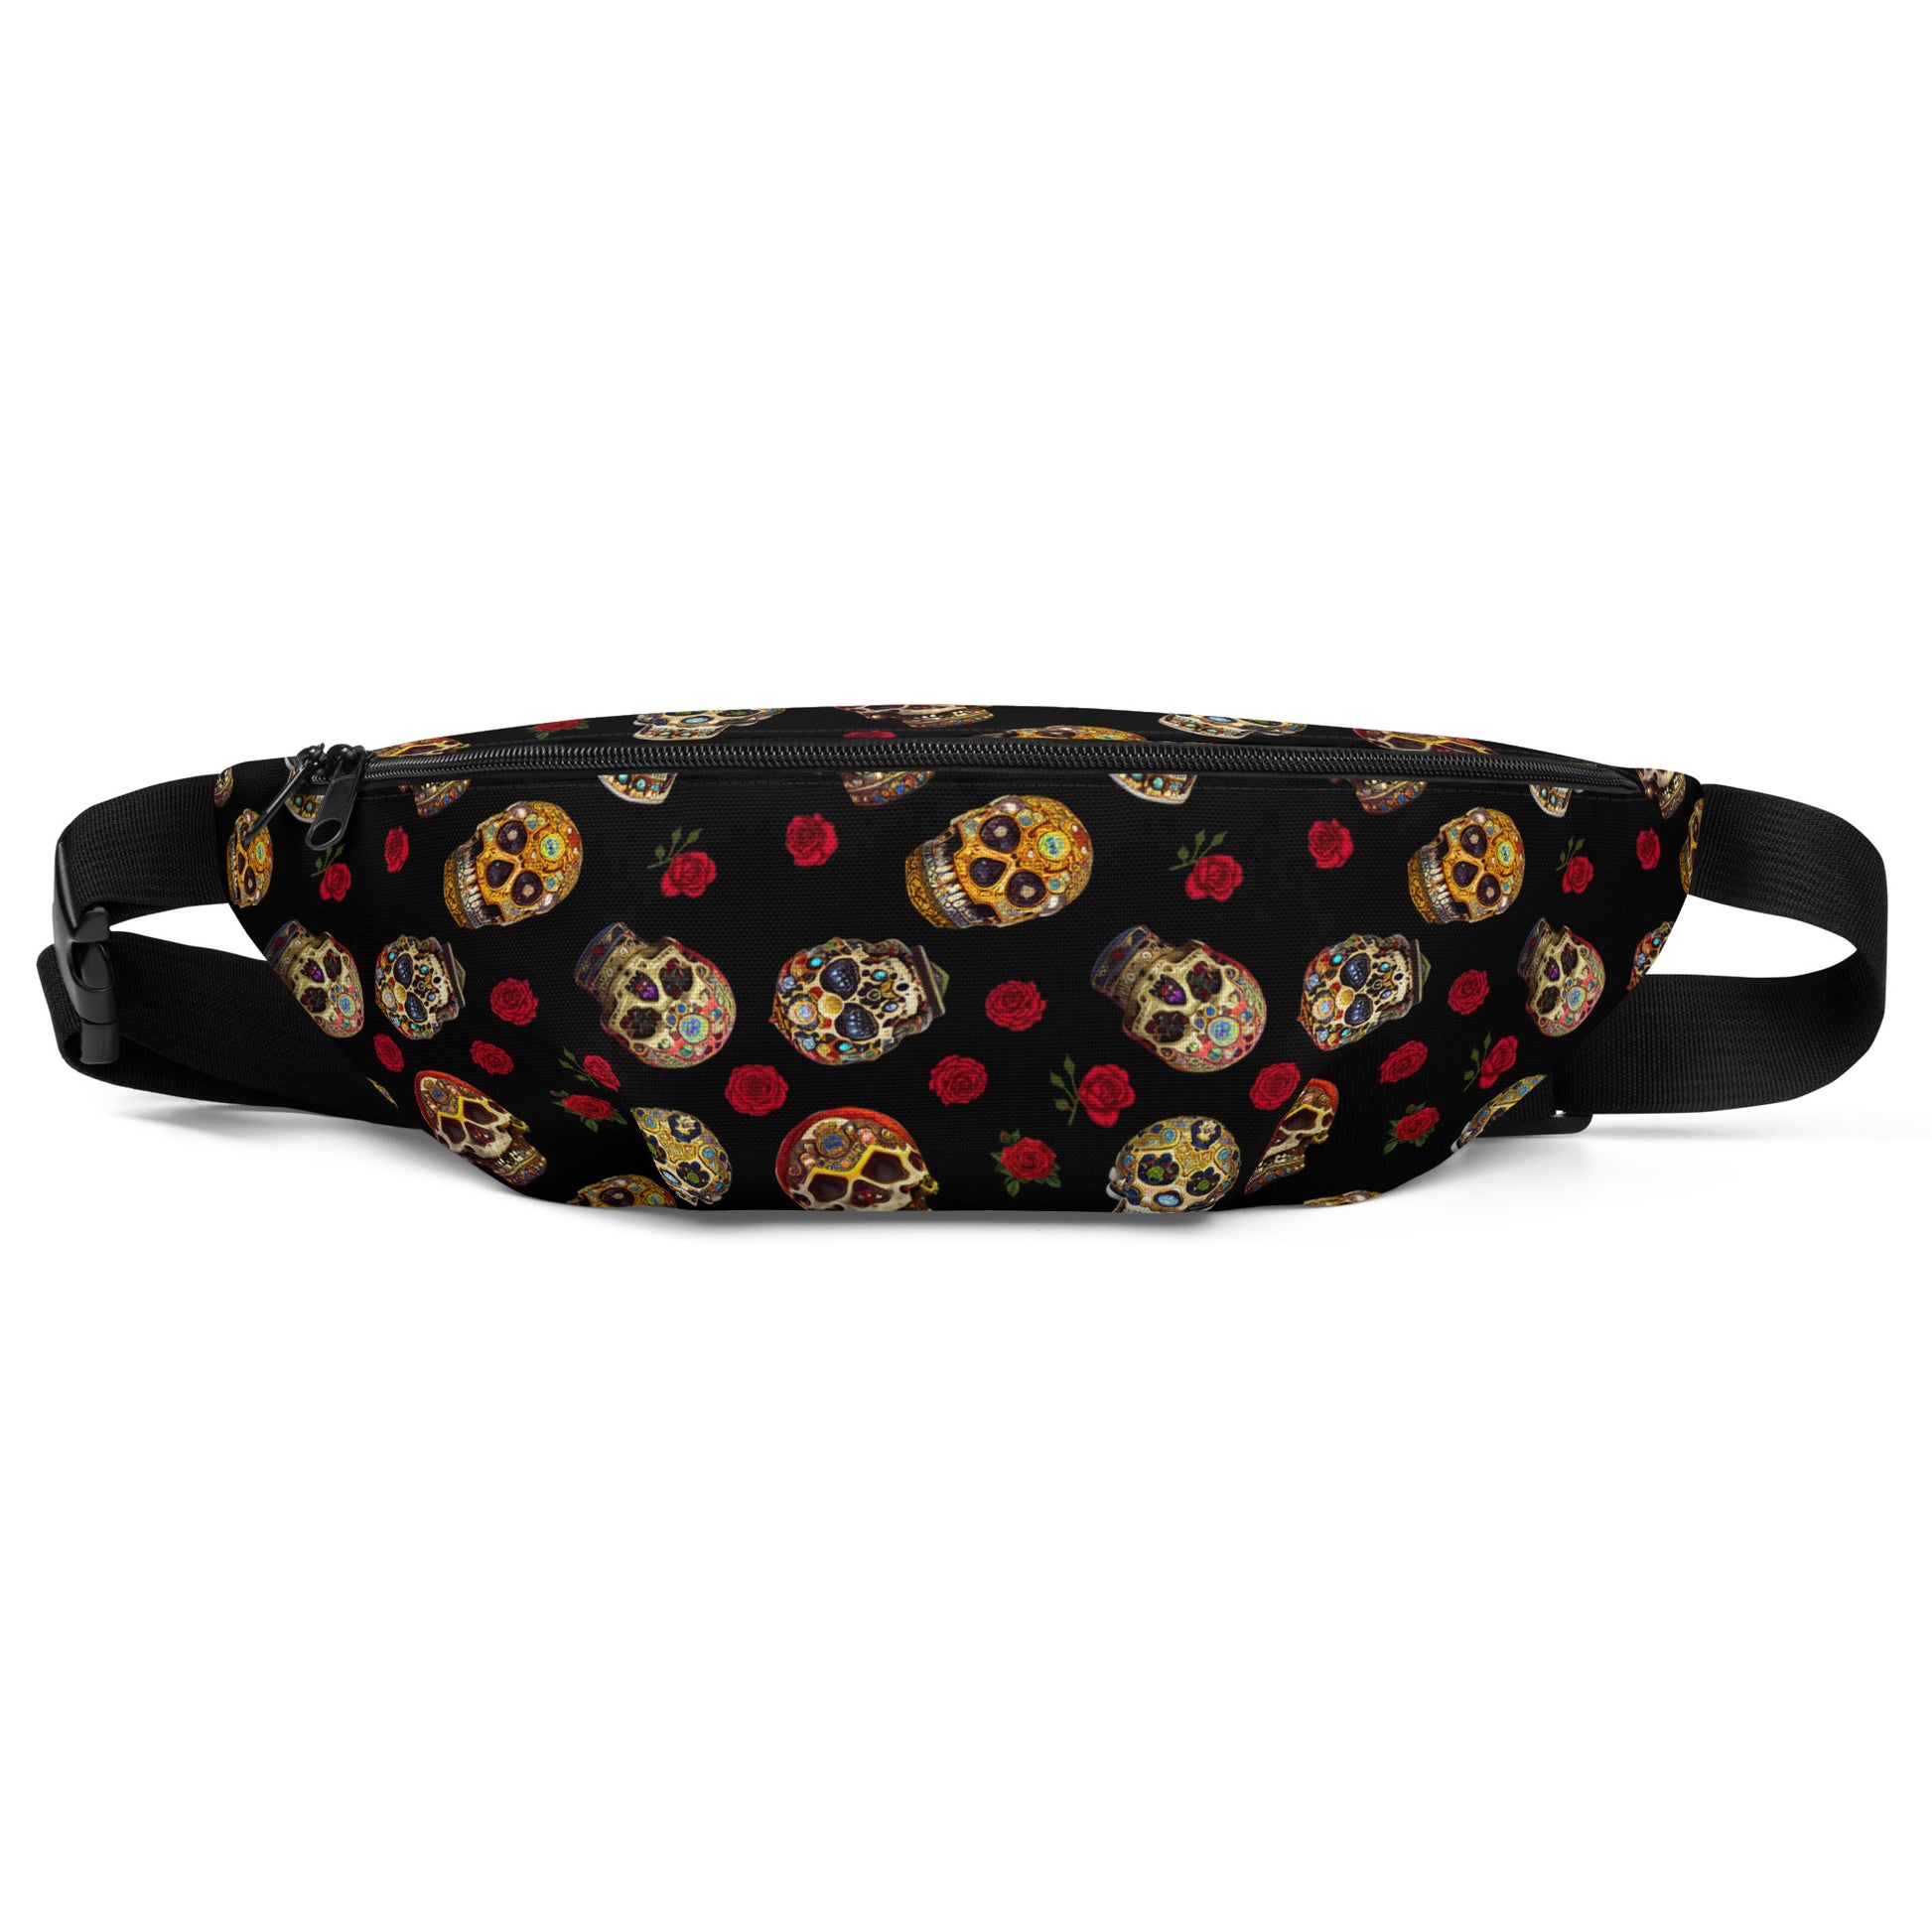 Skulls And Roses Fanny Pack - Adjustable Belt Travel Pouch Water